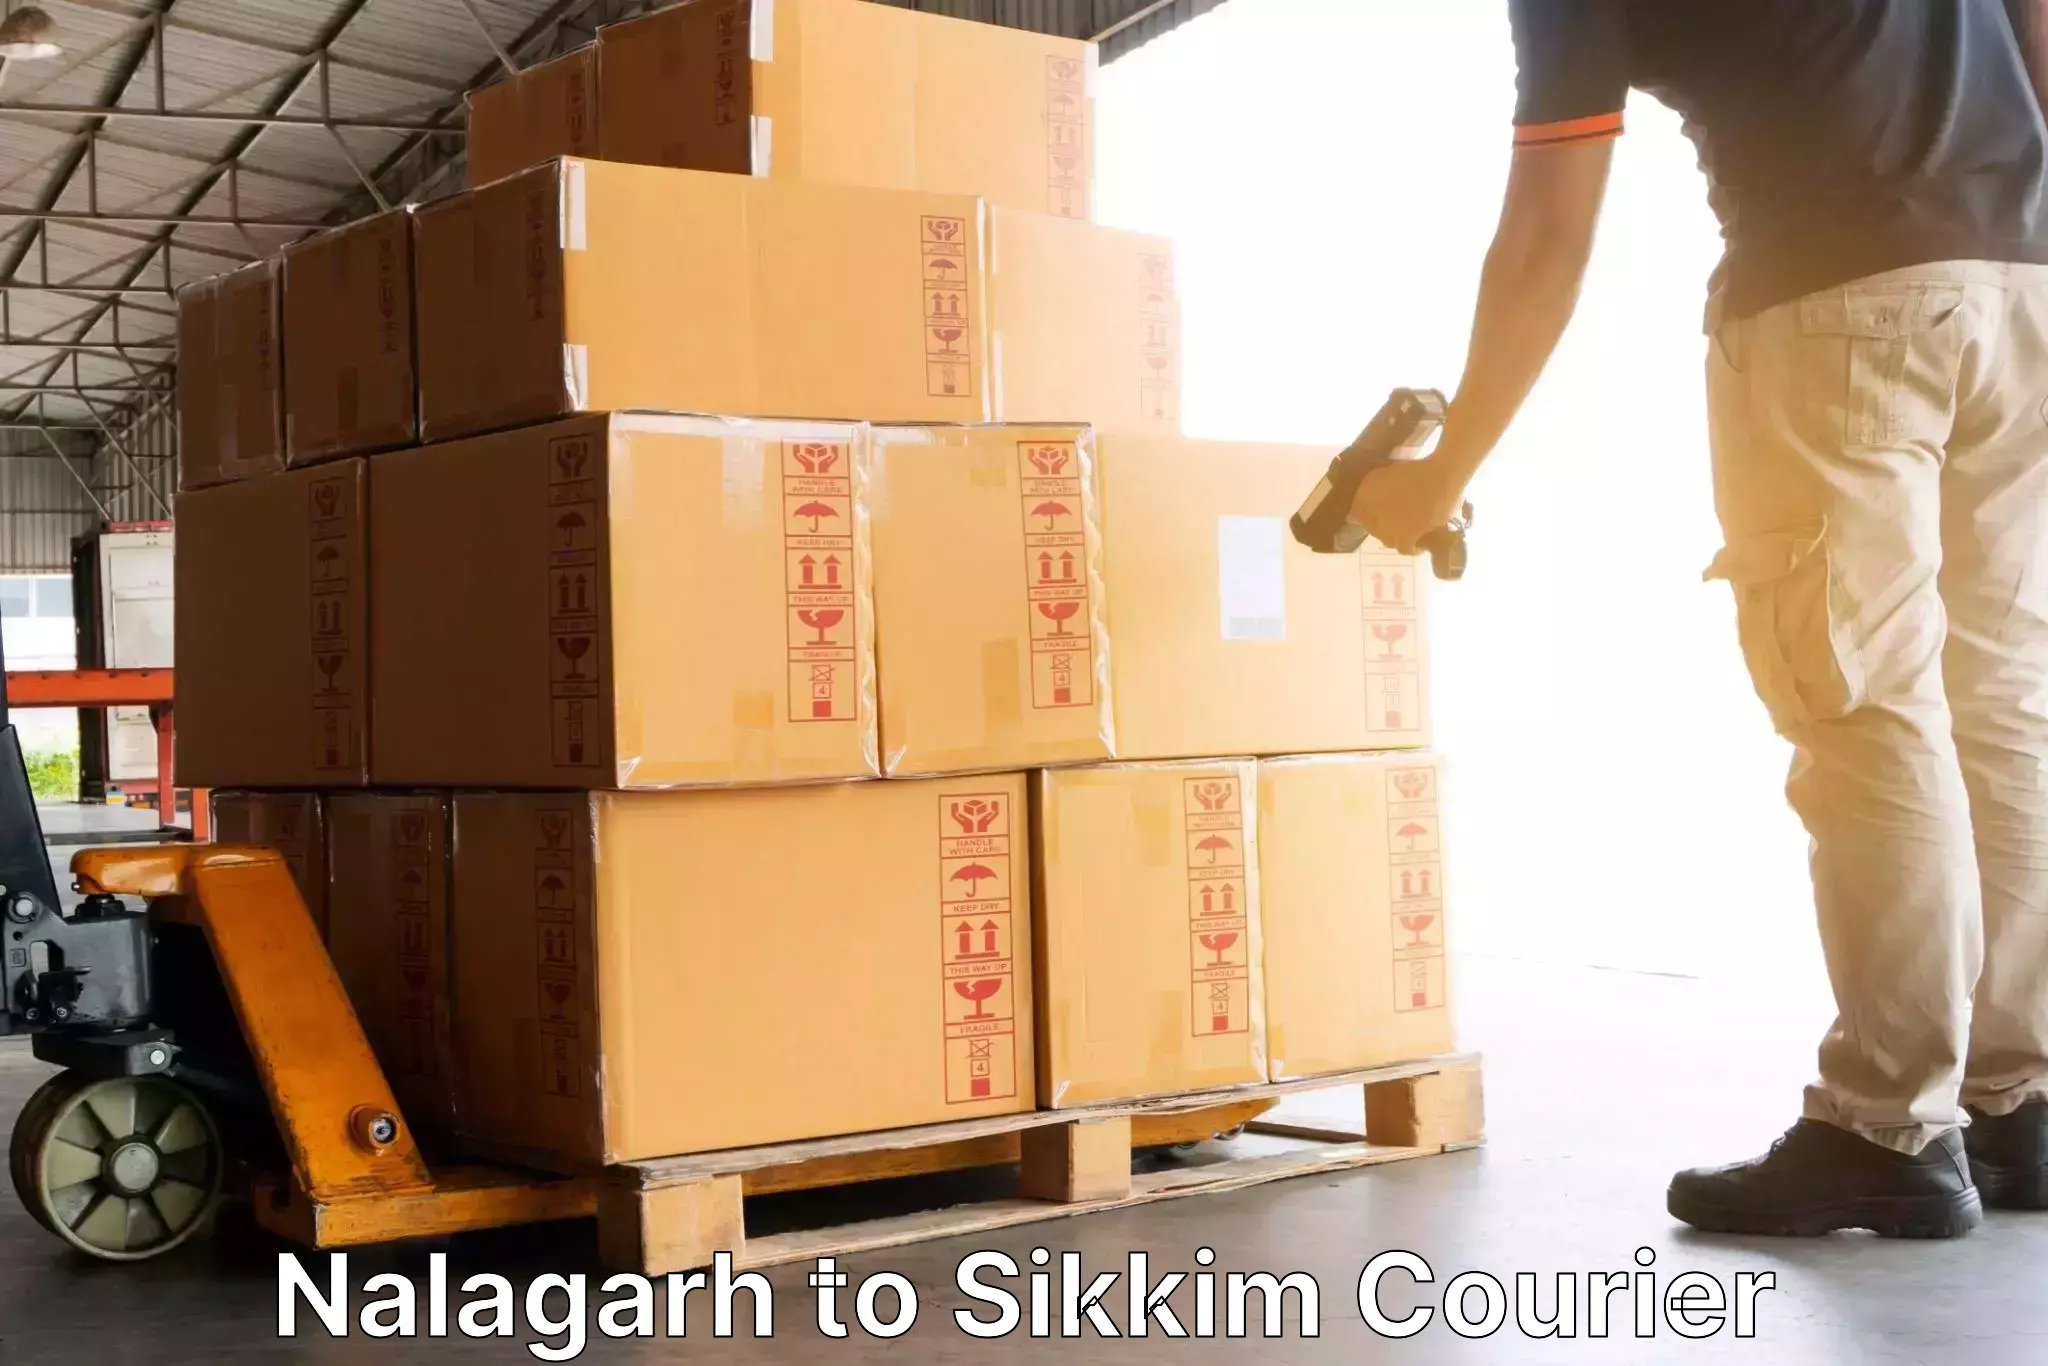 Express delivery capabilities in Nalagarh to Mangan